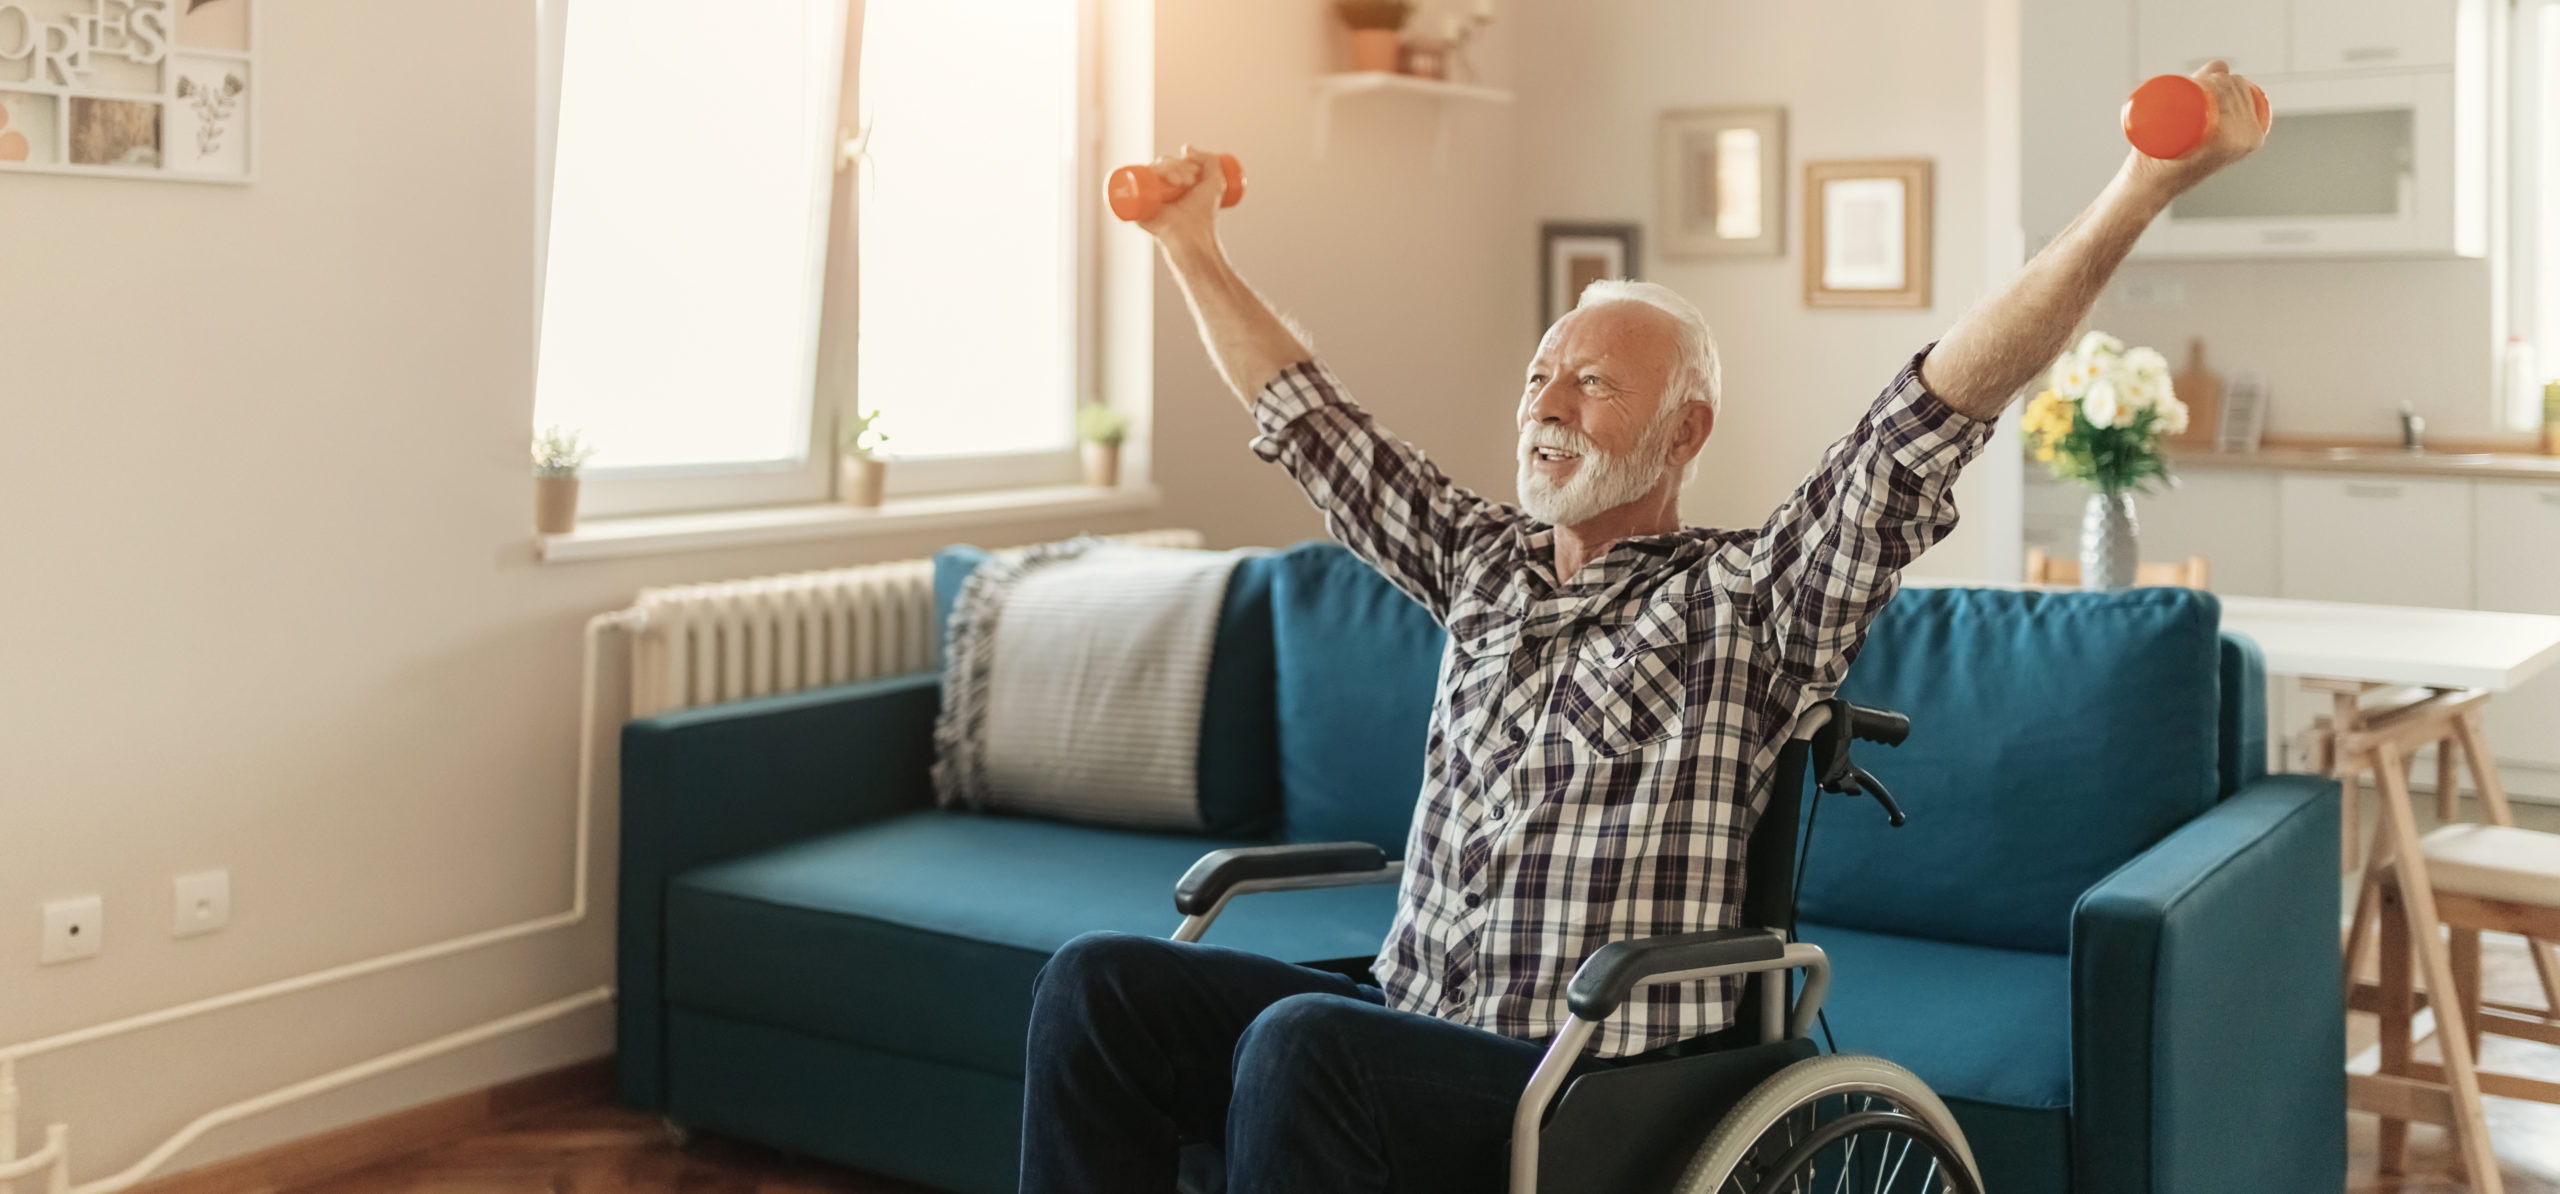 5 Great Exercises for Seniors in Wheelchairs